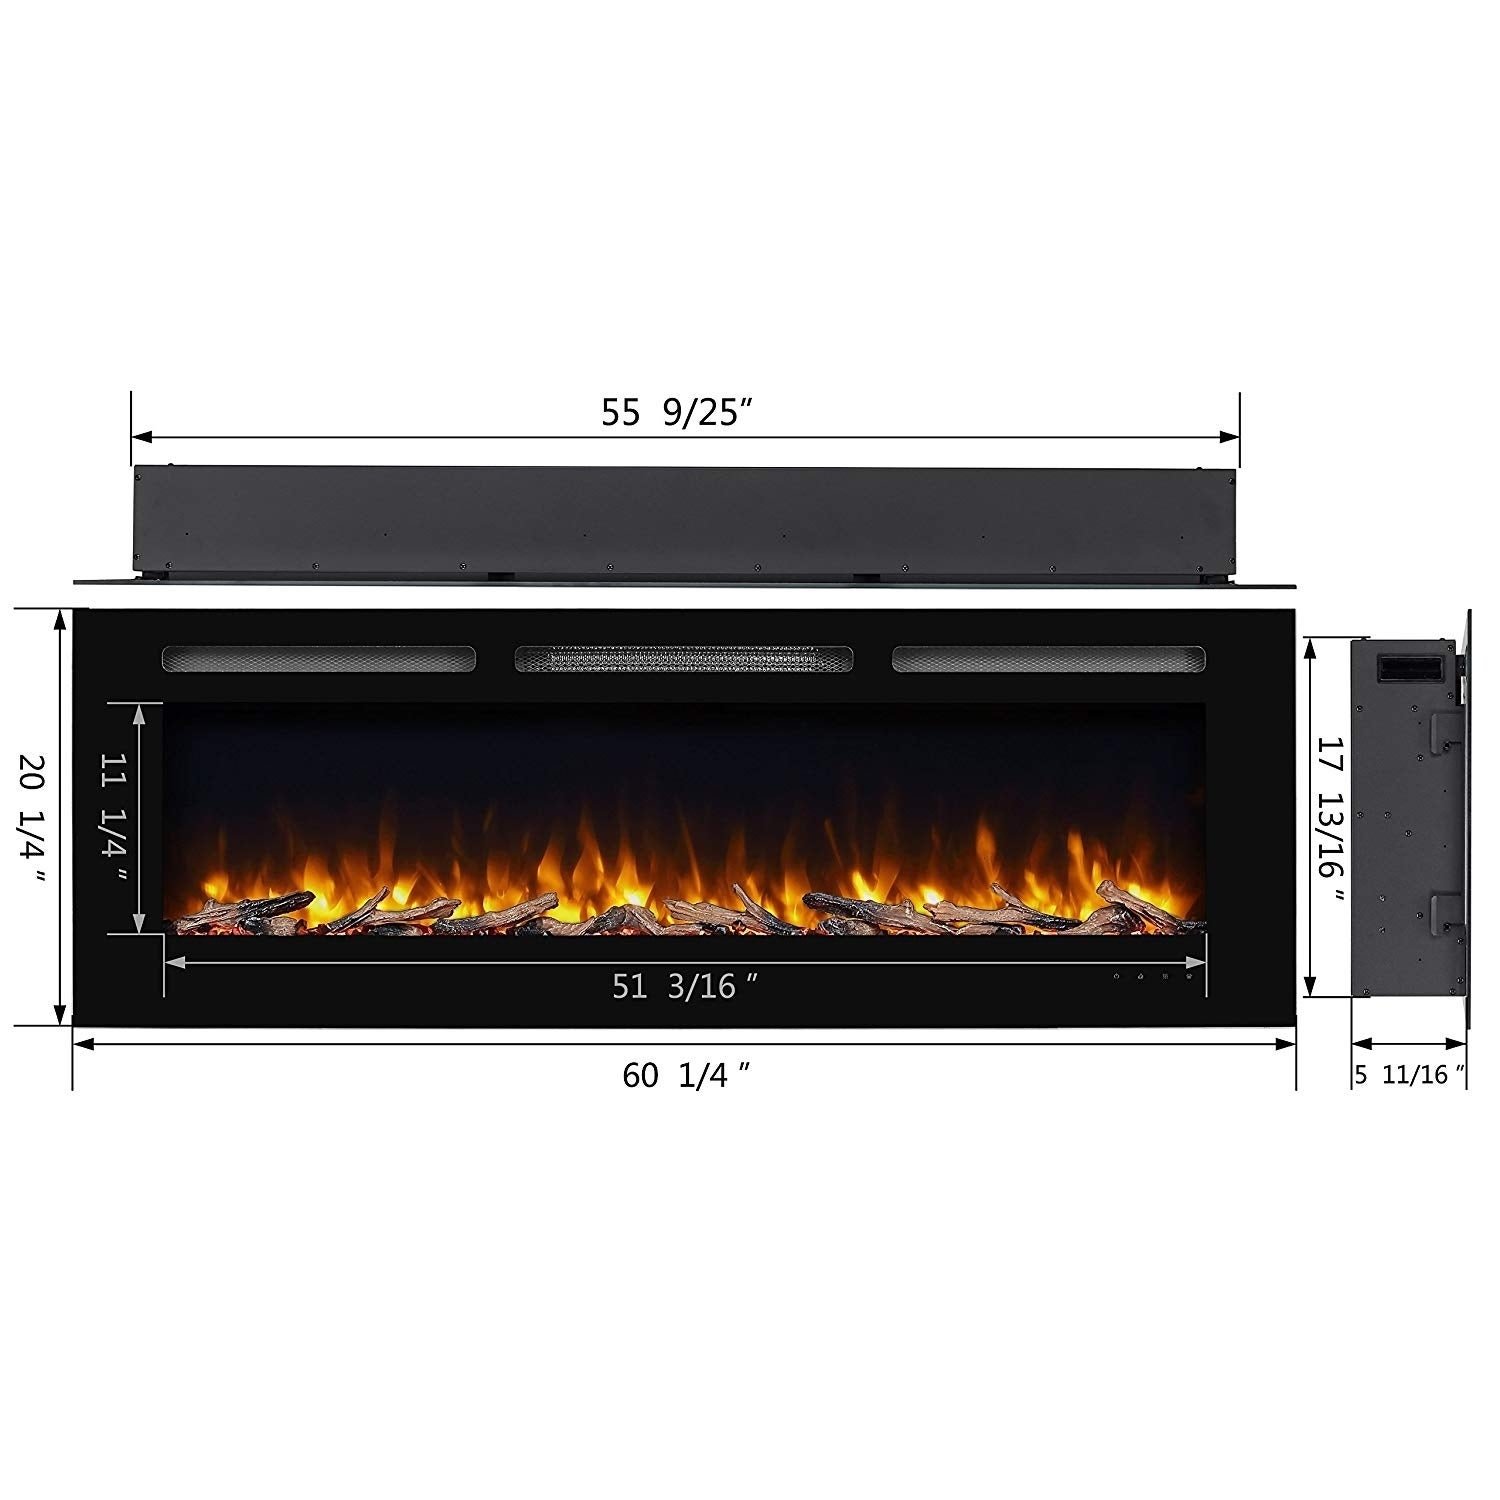 30 Inch Electric Fireplace Beautiful 60" Alice In Wall Recessed Electric Fireplace 1500w Black